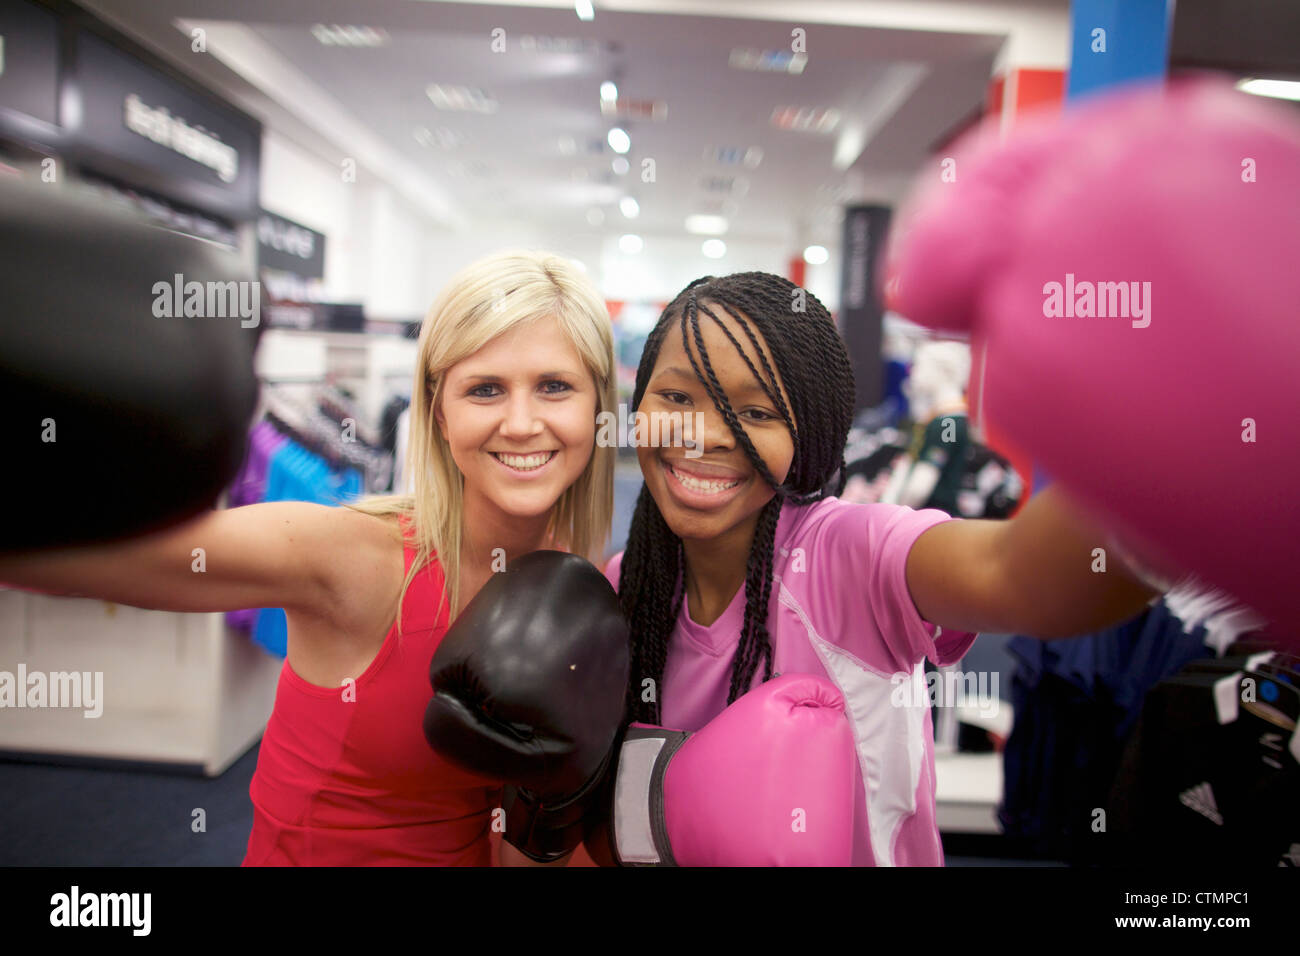 Two young women wearing boxing gloves and looking at the camera, Pietermaritzburg, KwaZulu-Natal, South Africa Stock Photo